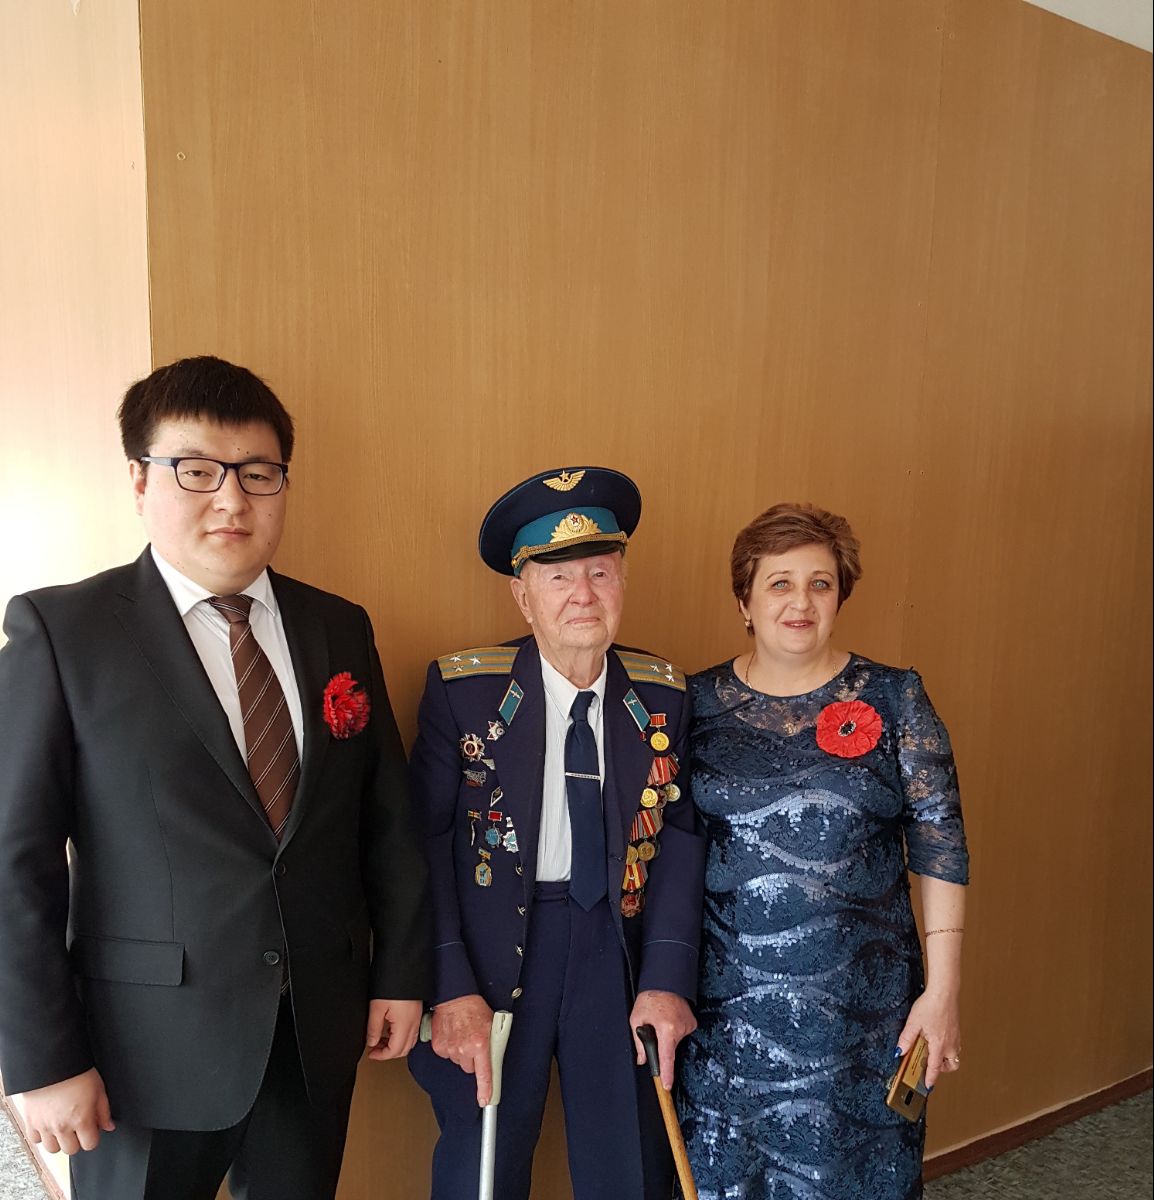 On May 8, 2019, the Embassy of the Kyrgyz Republic in Ukraine, representatives of the public association “Tosor Koomu” (Issyk-Kul region) and the Kyrgyz diaspora of the Dnipropetrovsk region took part in the event organized by secondary school # 52 in honor of the Hero of the Soviet Union Mukash Salakunov.